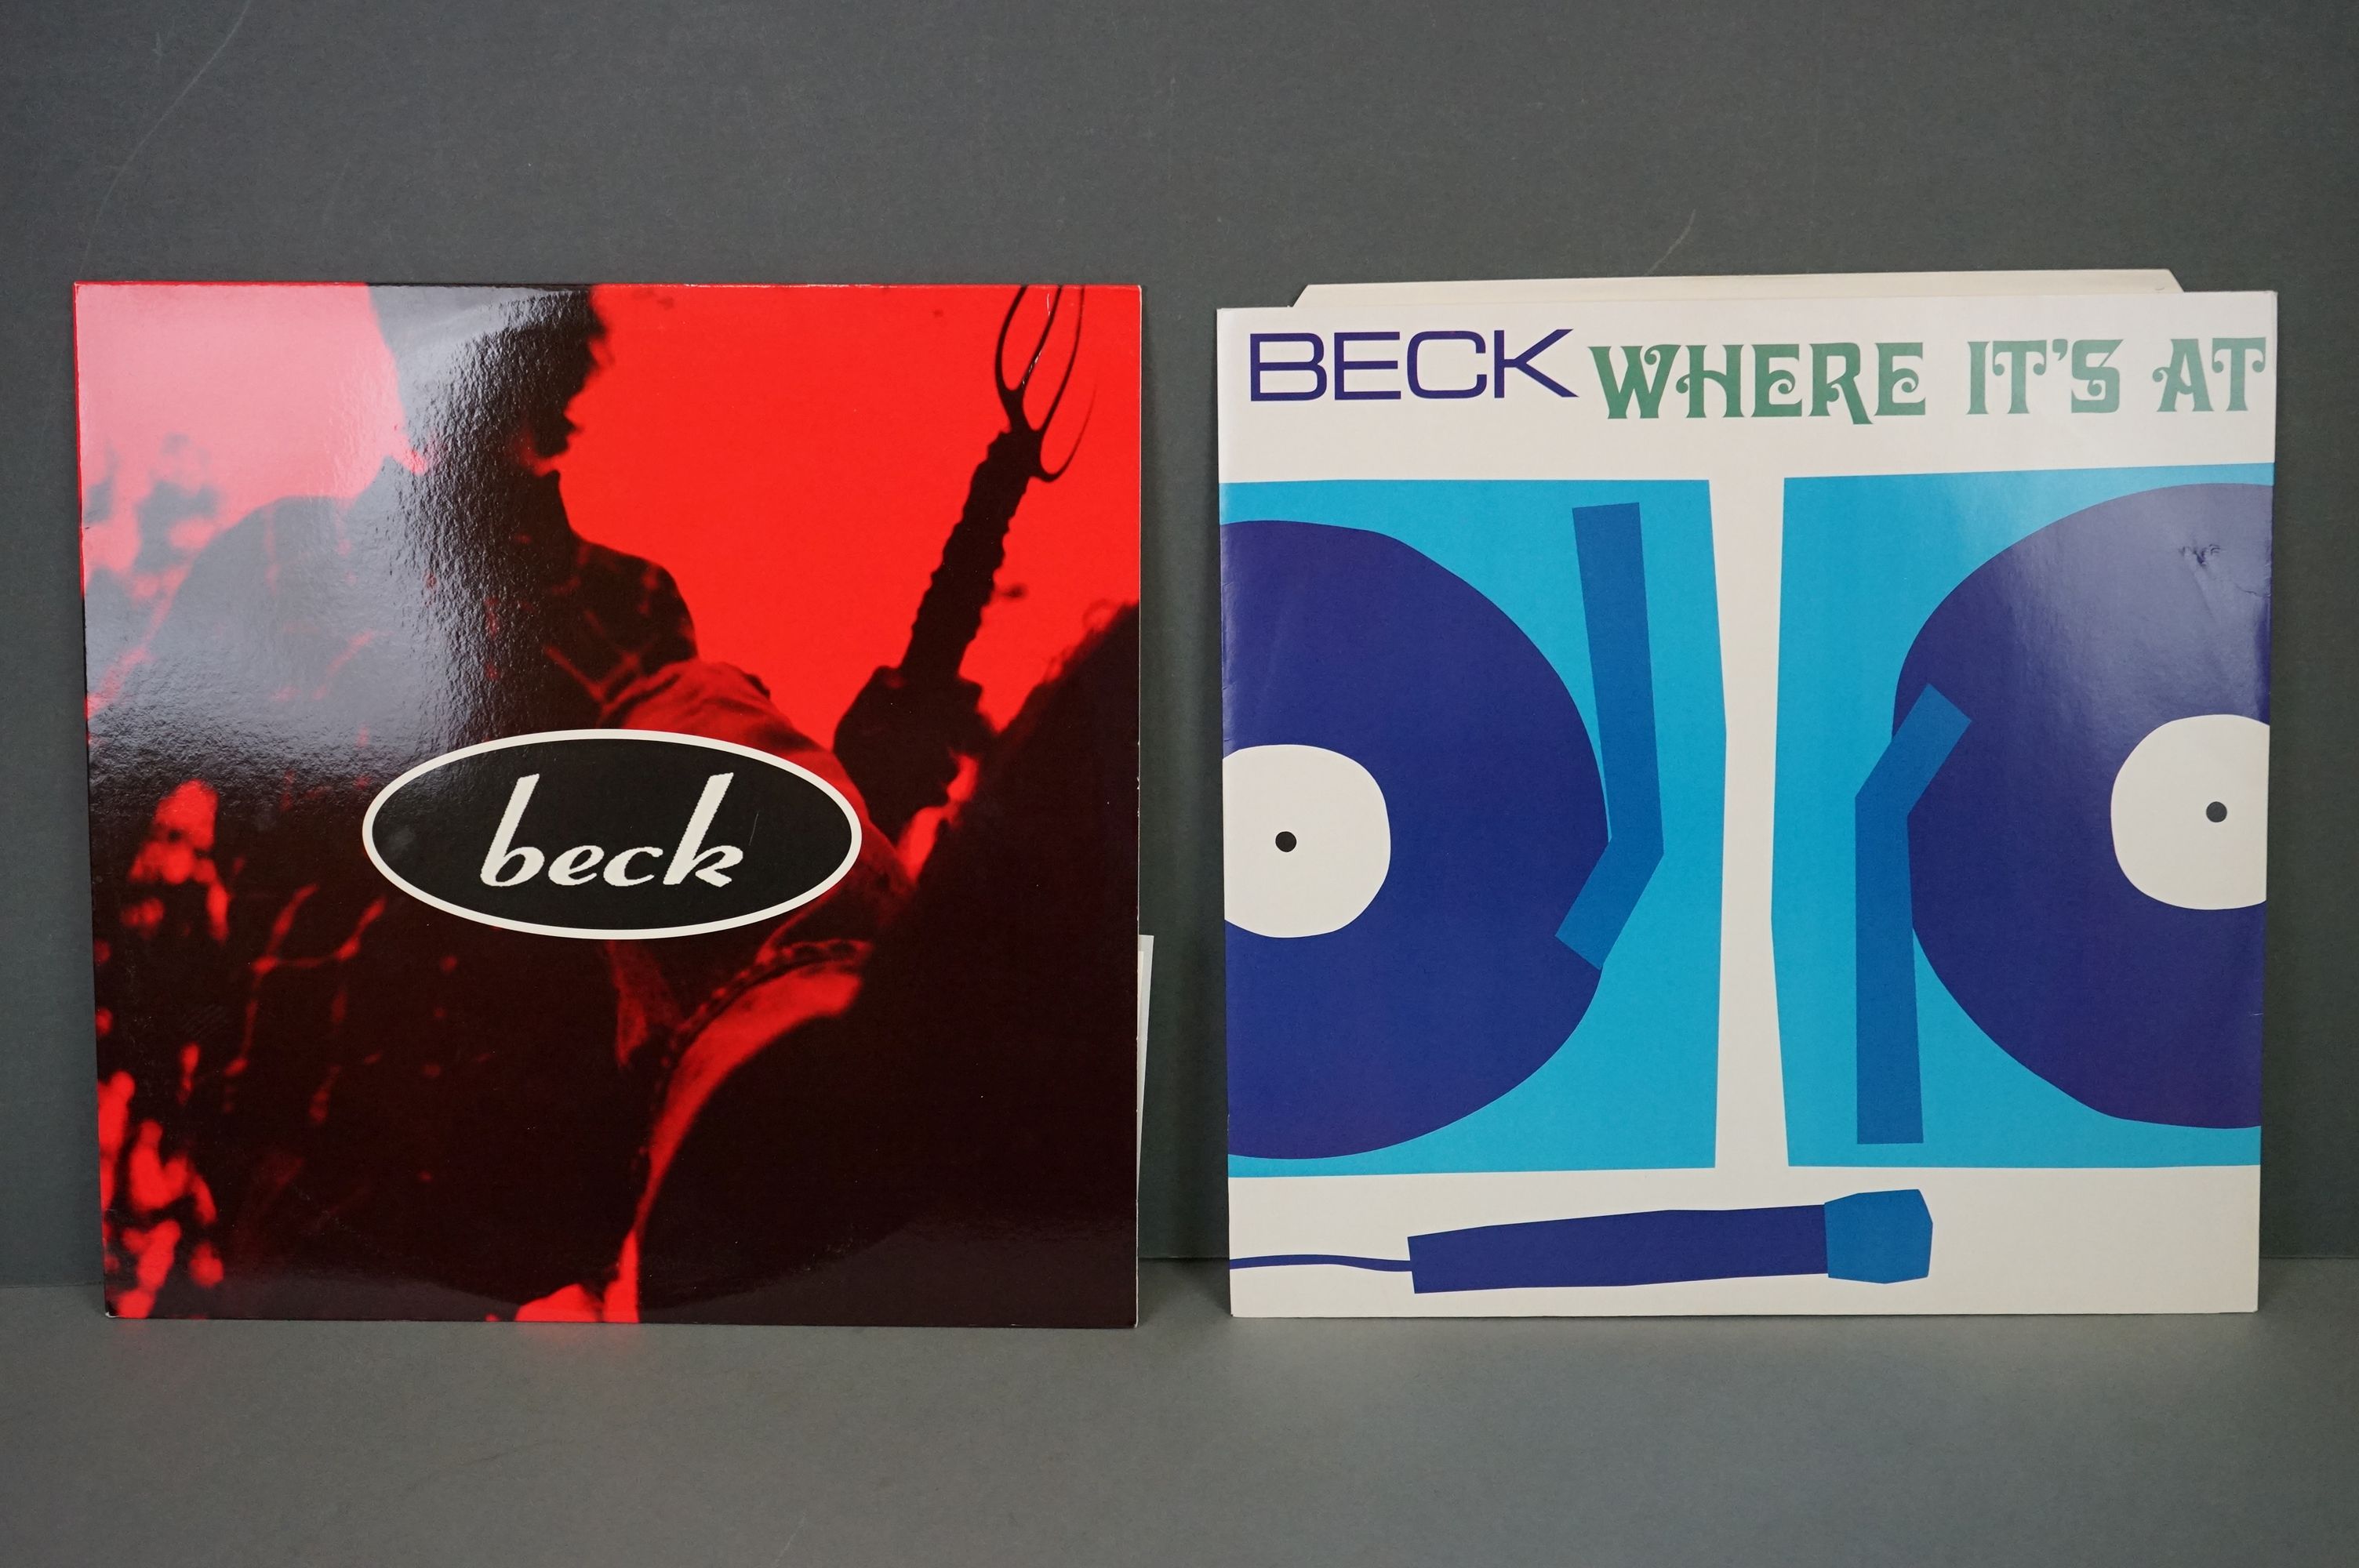 Vinyl - Beck - Two 12" singles to include Loser BL5 and Where It's At, both vg+ with vendor initials